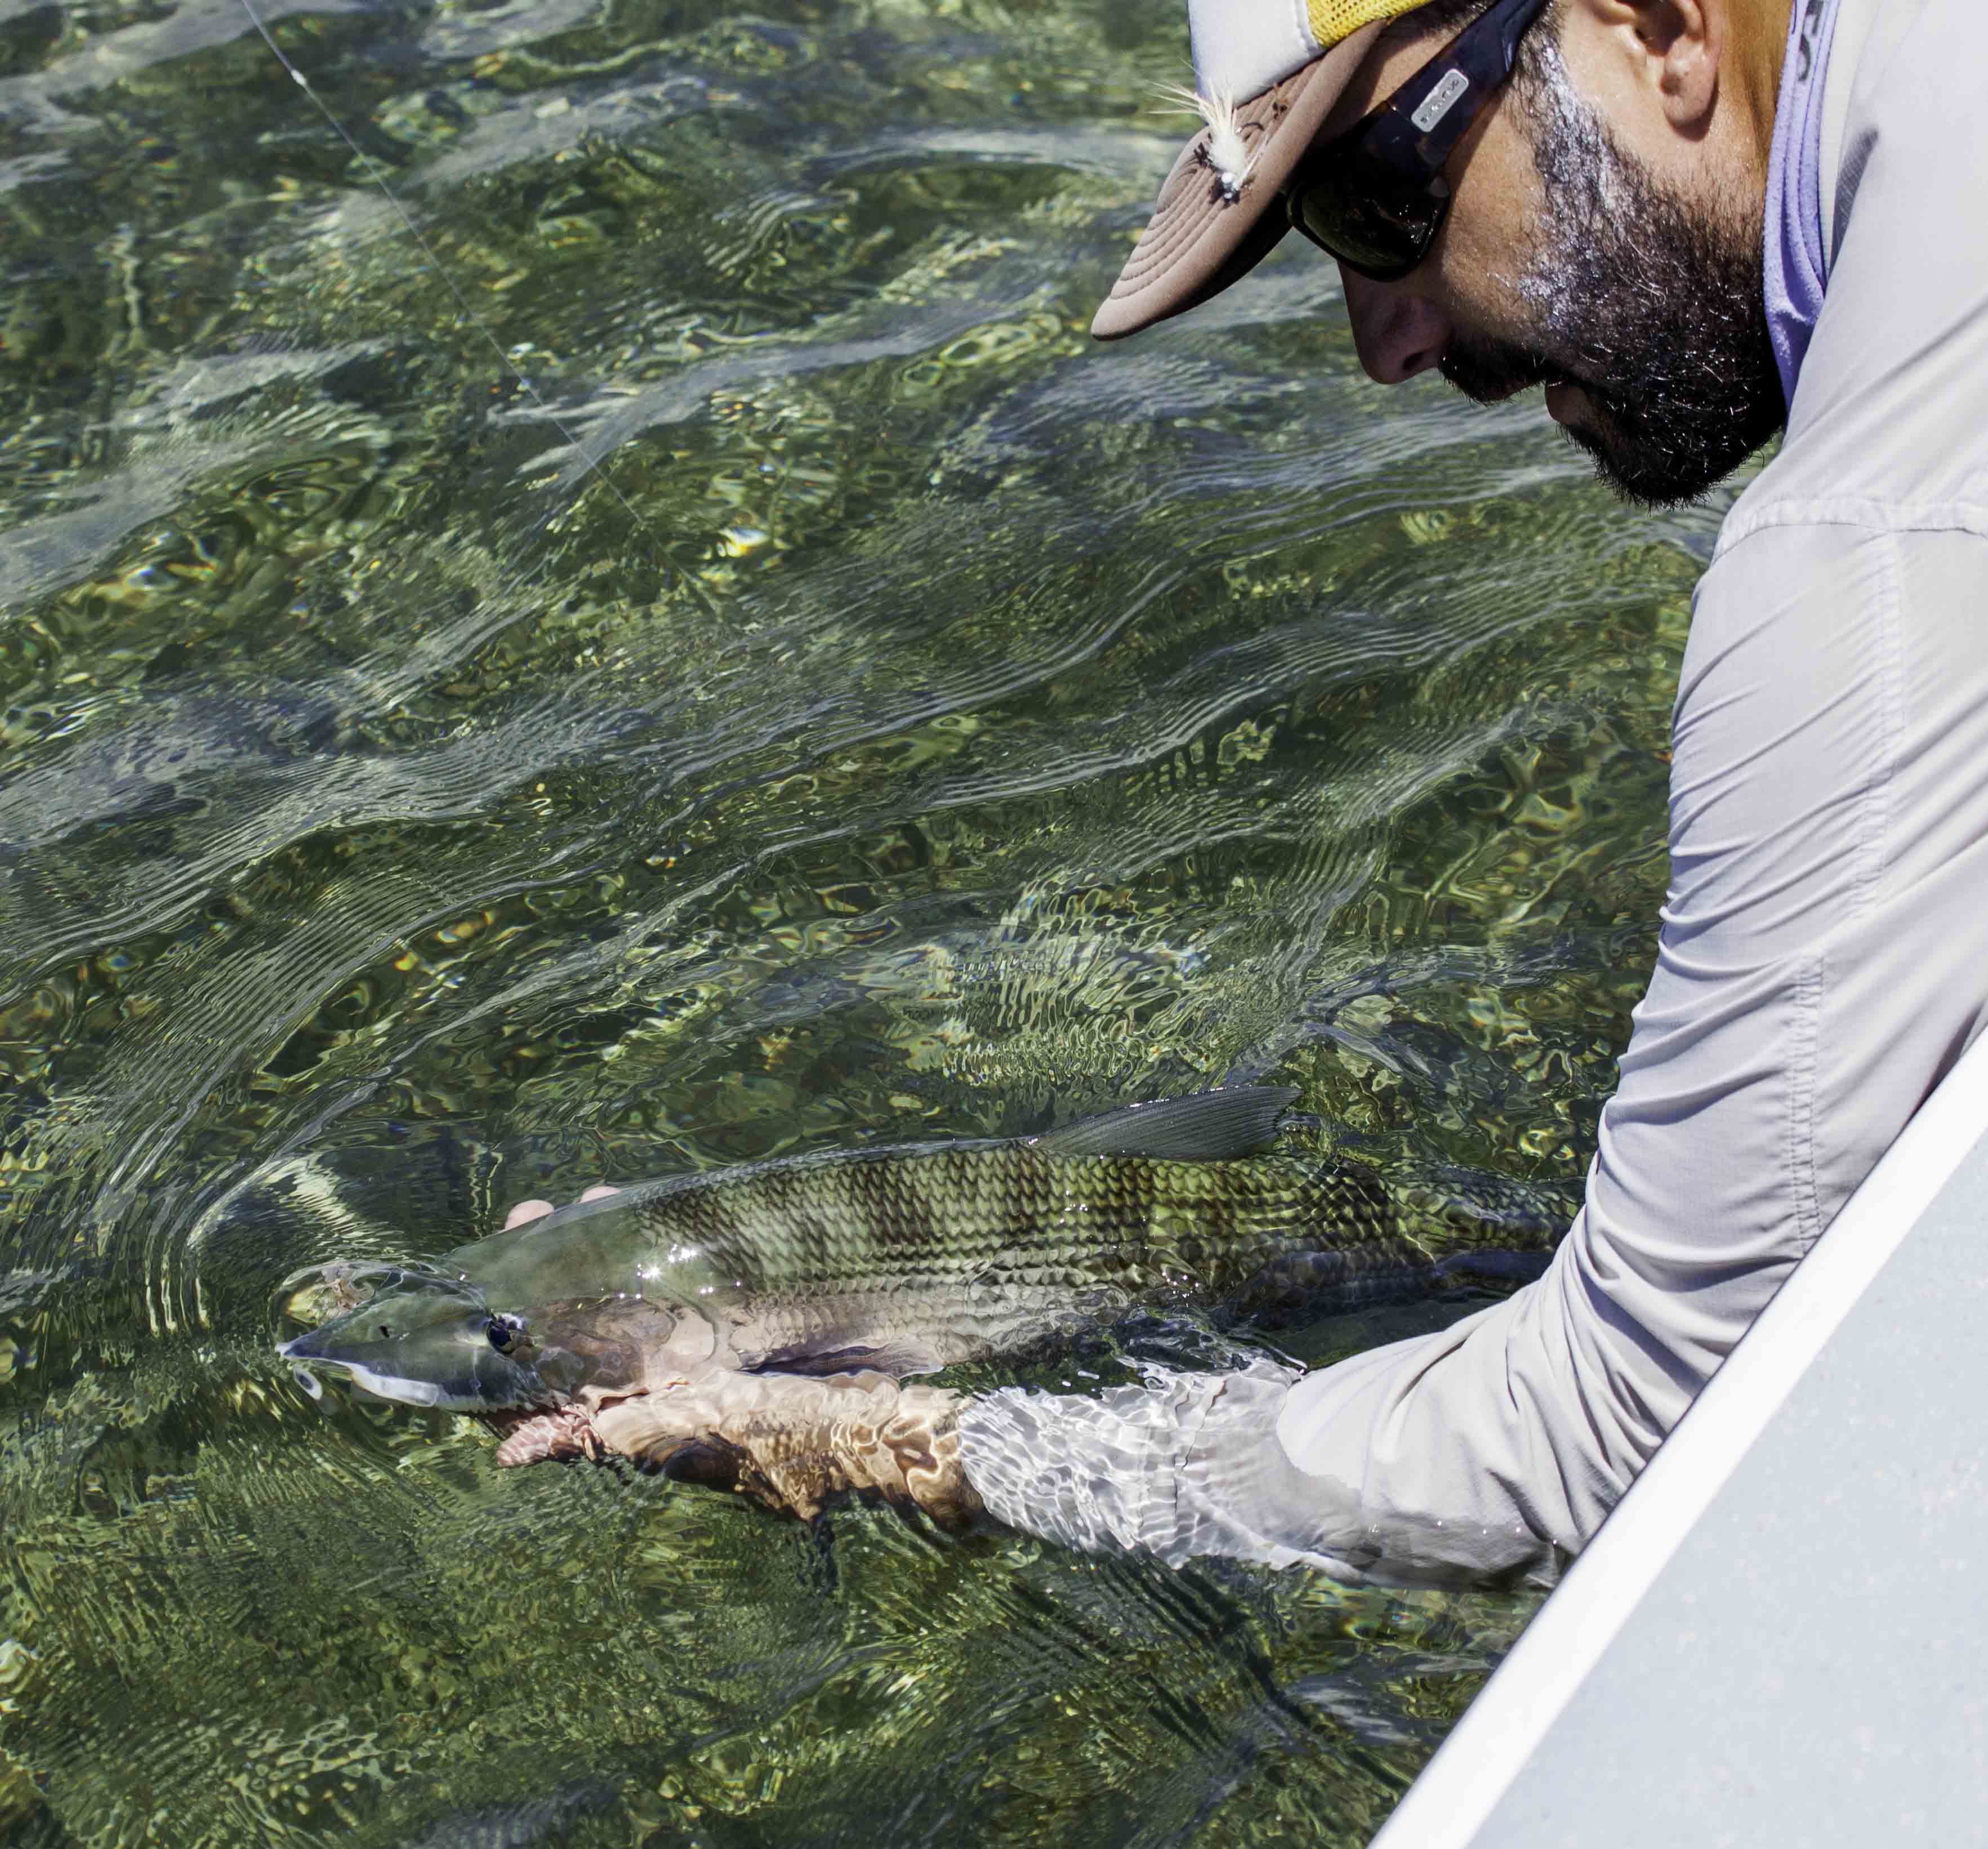 Yet another bonefish photo from Nathaniel and Aaron in the 2014 Superfly